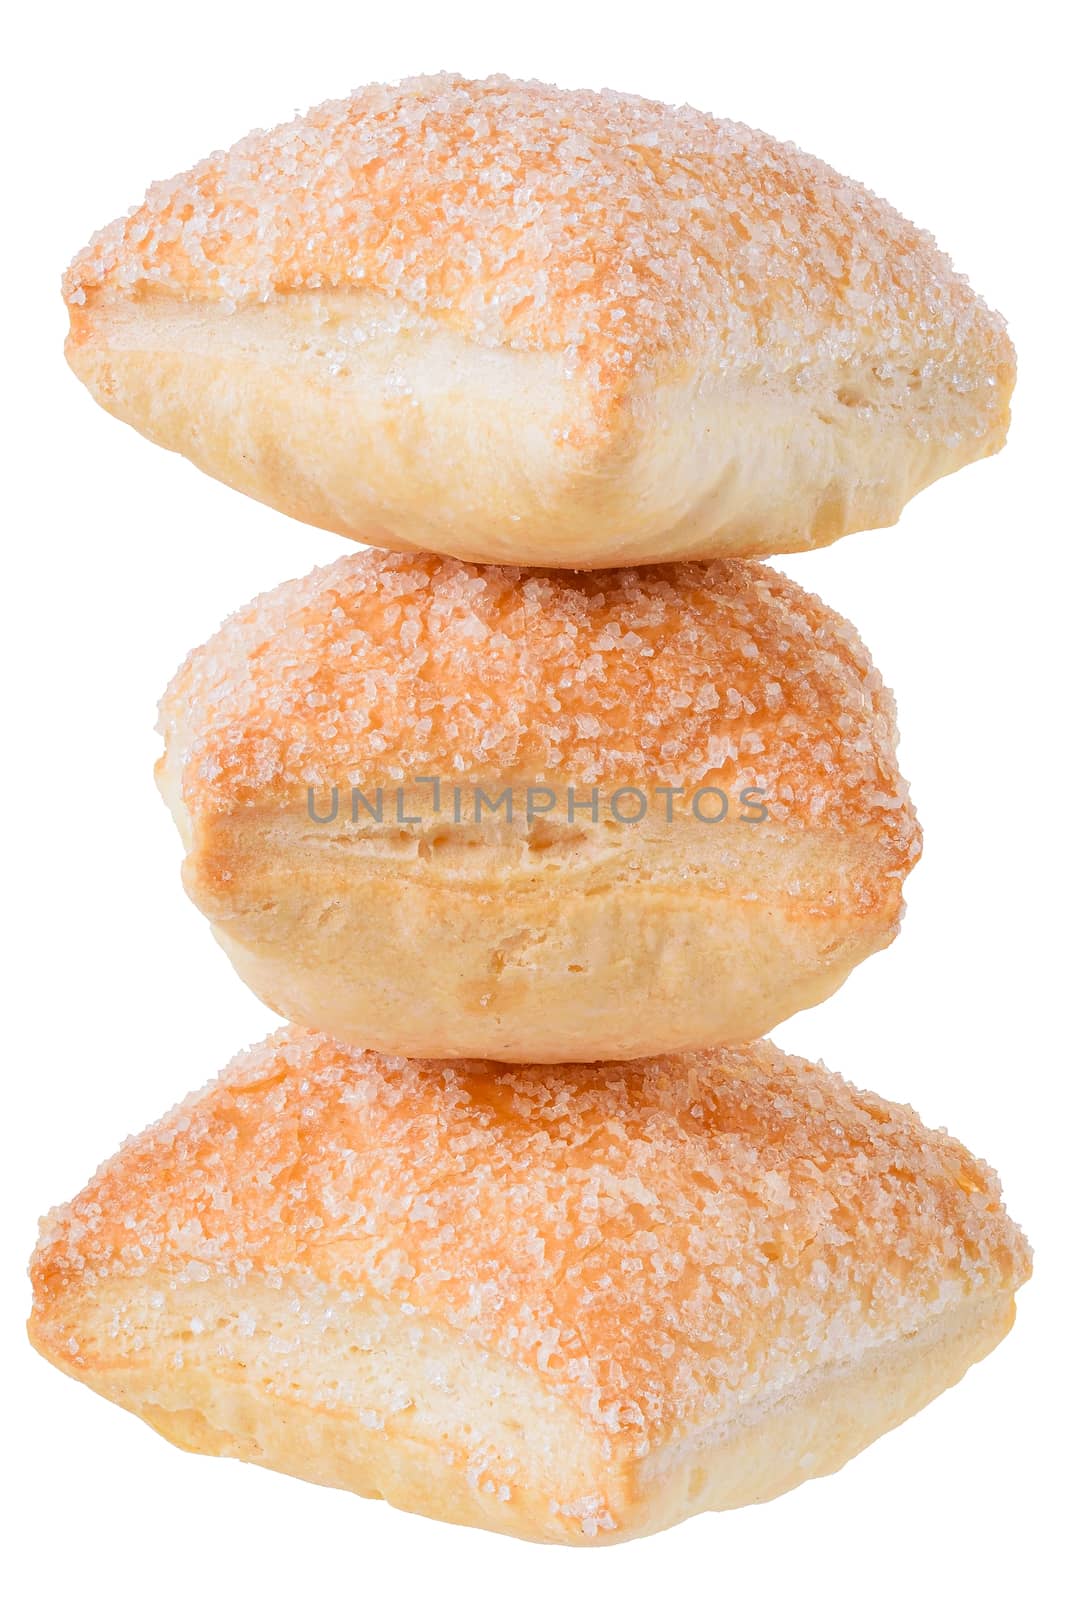 Homemade shortbread cookies isolated on white background.